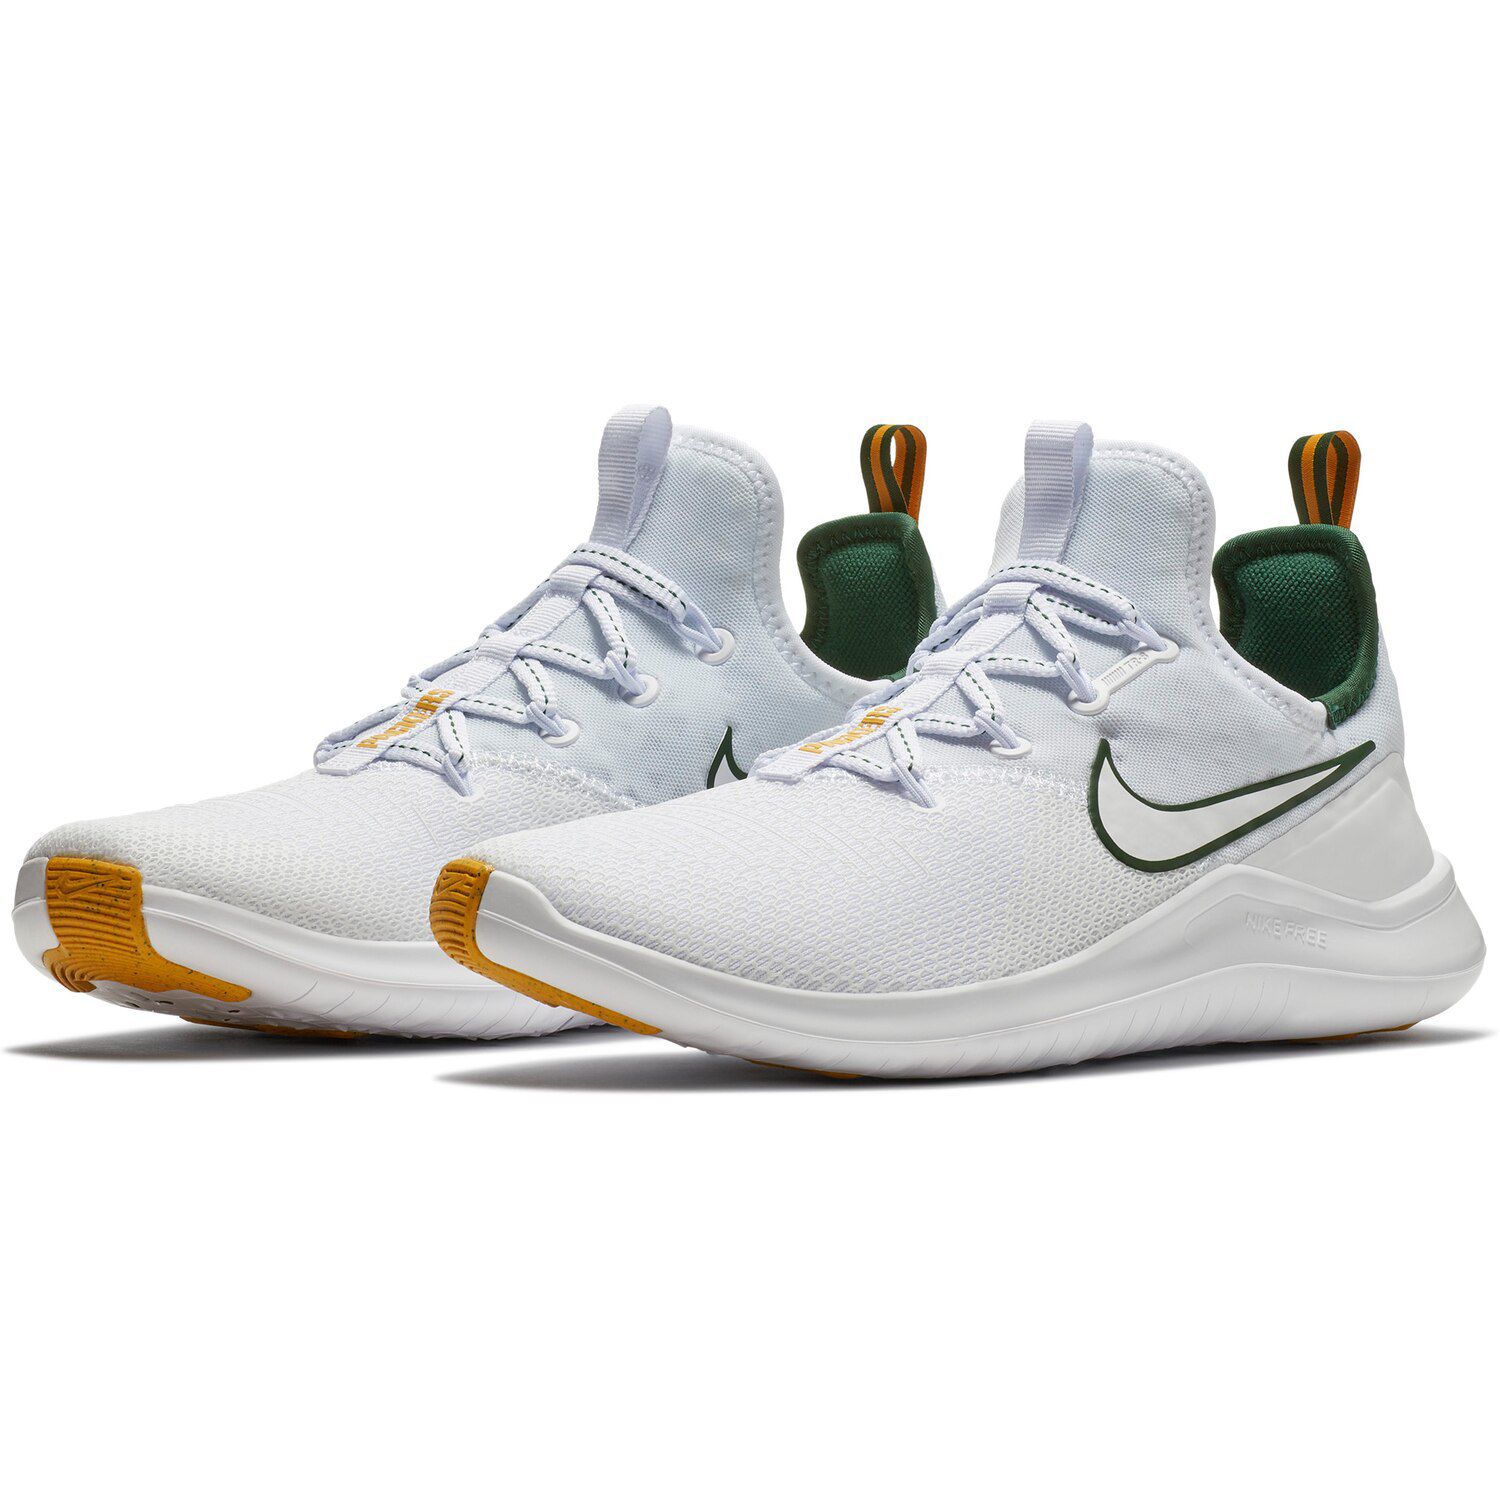 the bay womens nike shoes